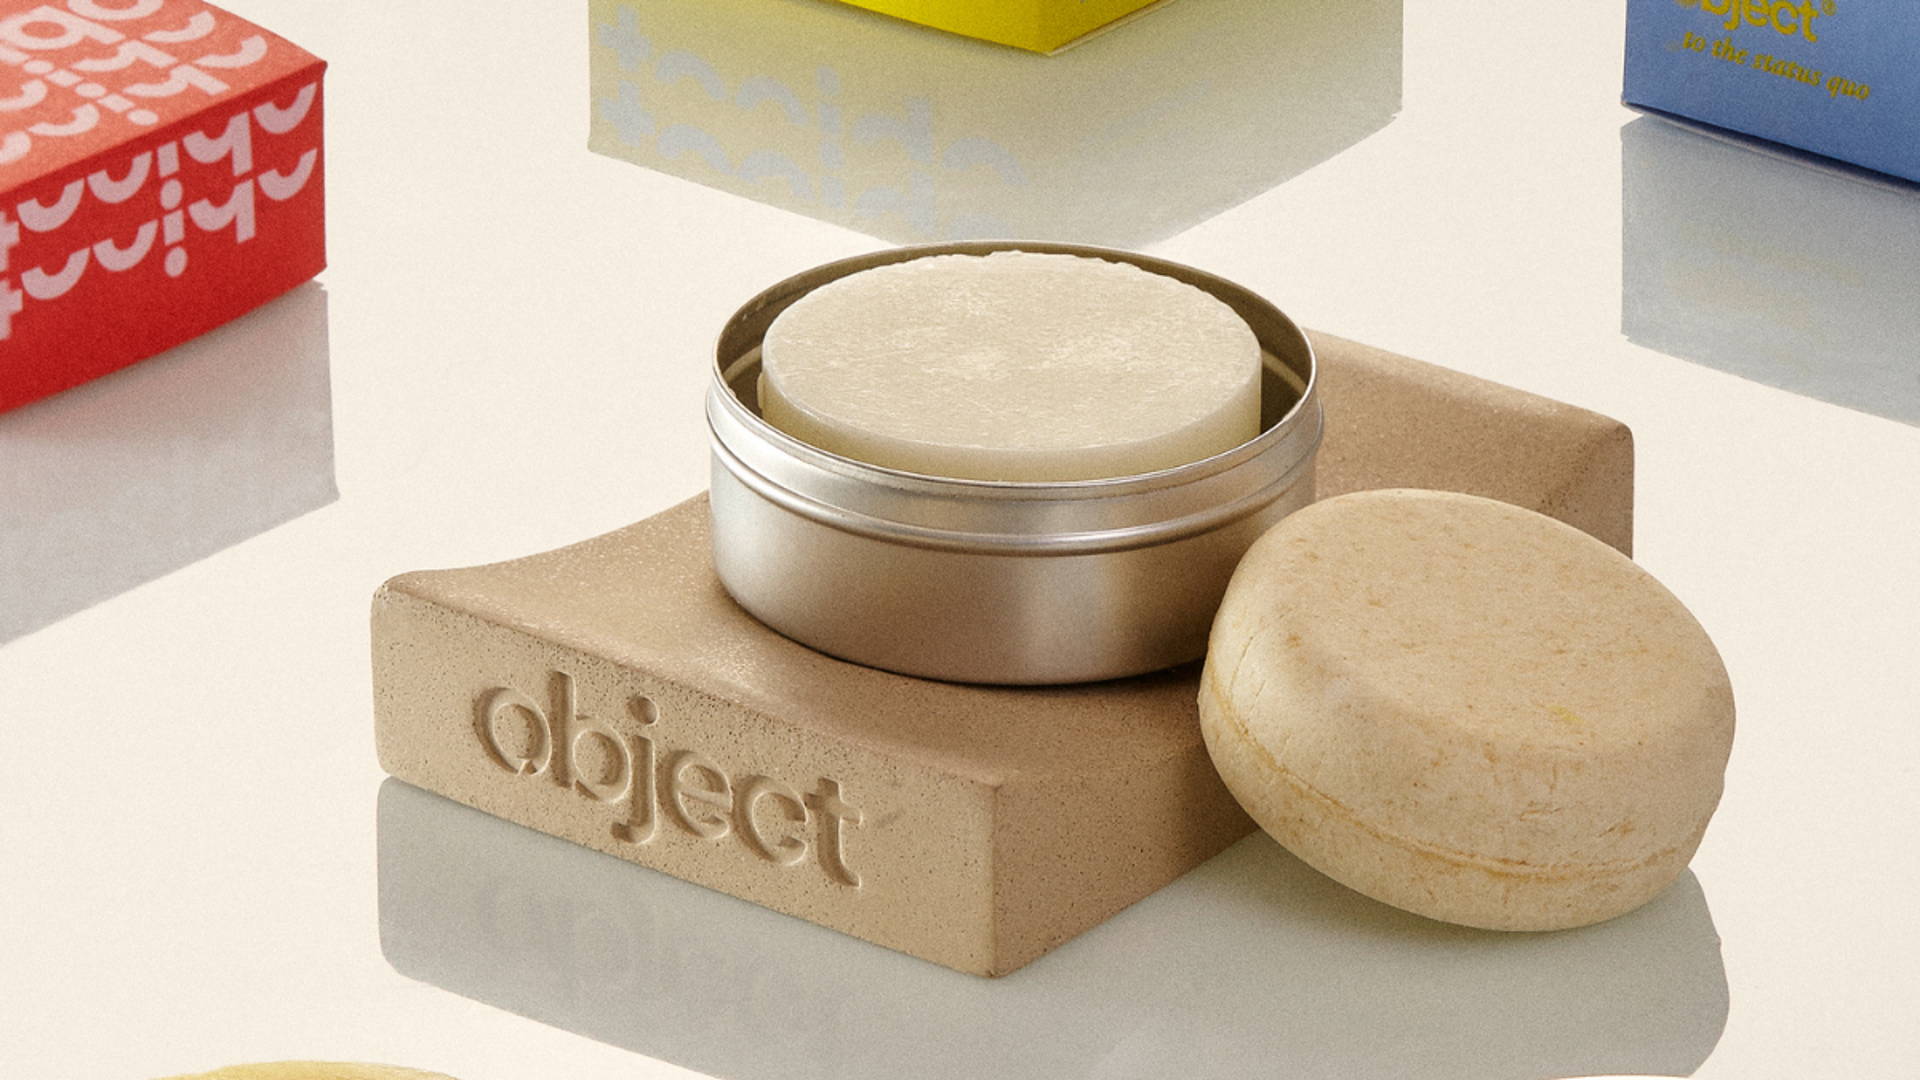 Featured image for Object Isn't Your Typical Sustainable Packaging Design